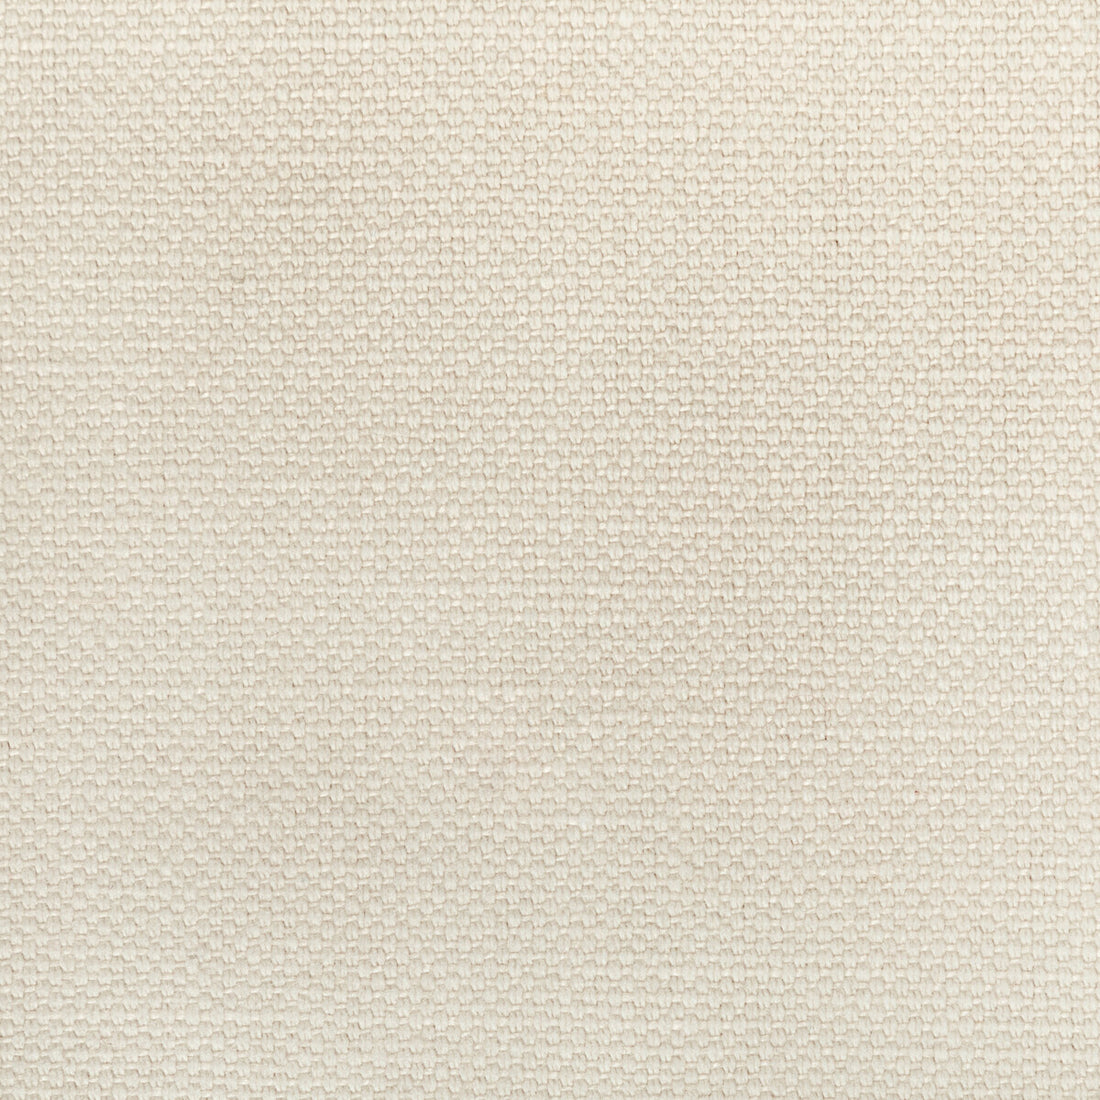 Carson fabric in antique white color - pattern 36282.1101.0 - by Kravet Basics